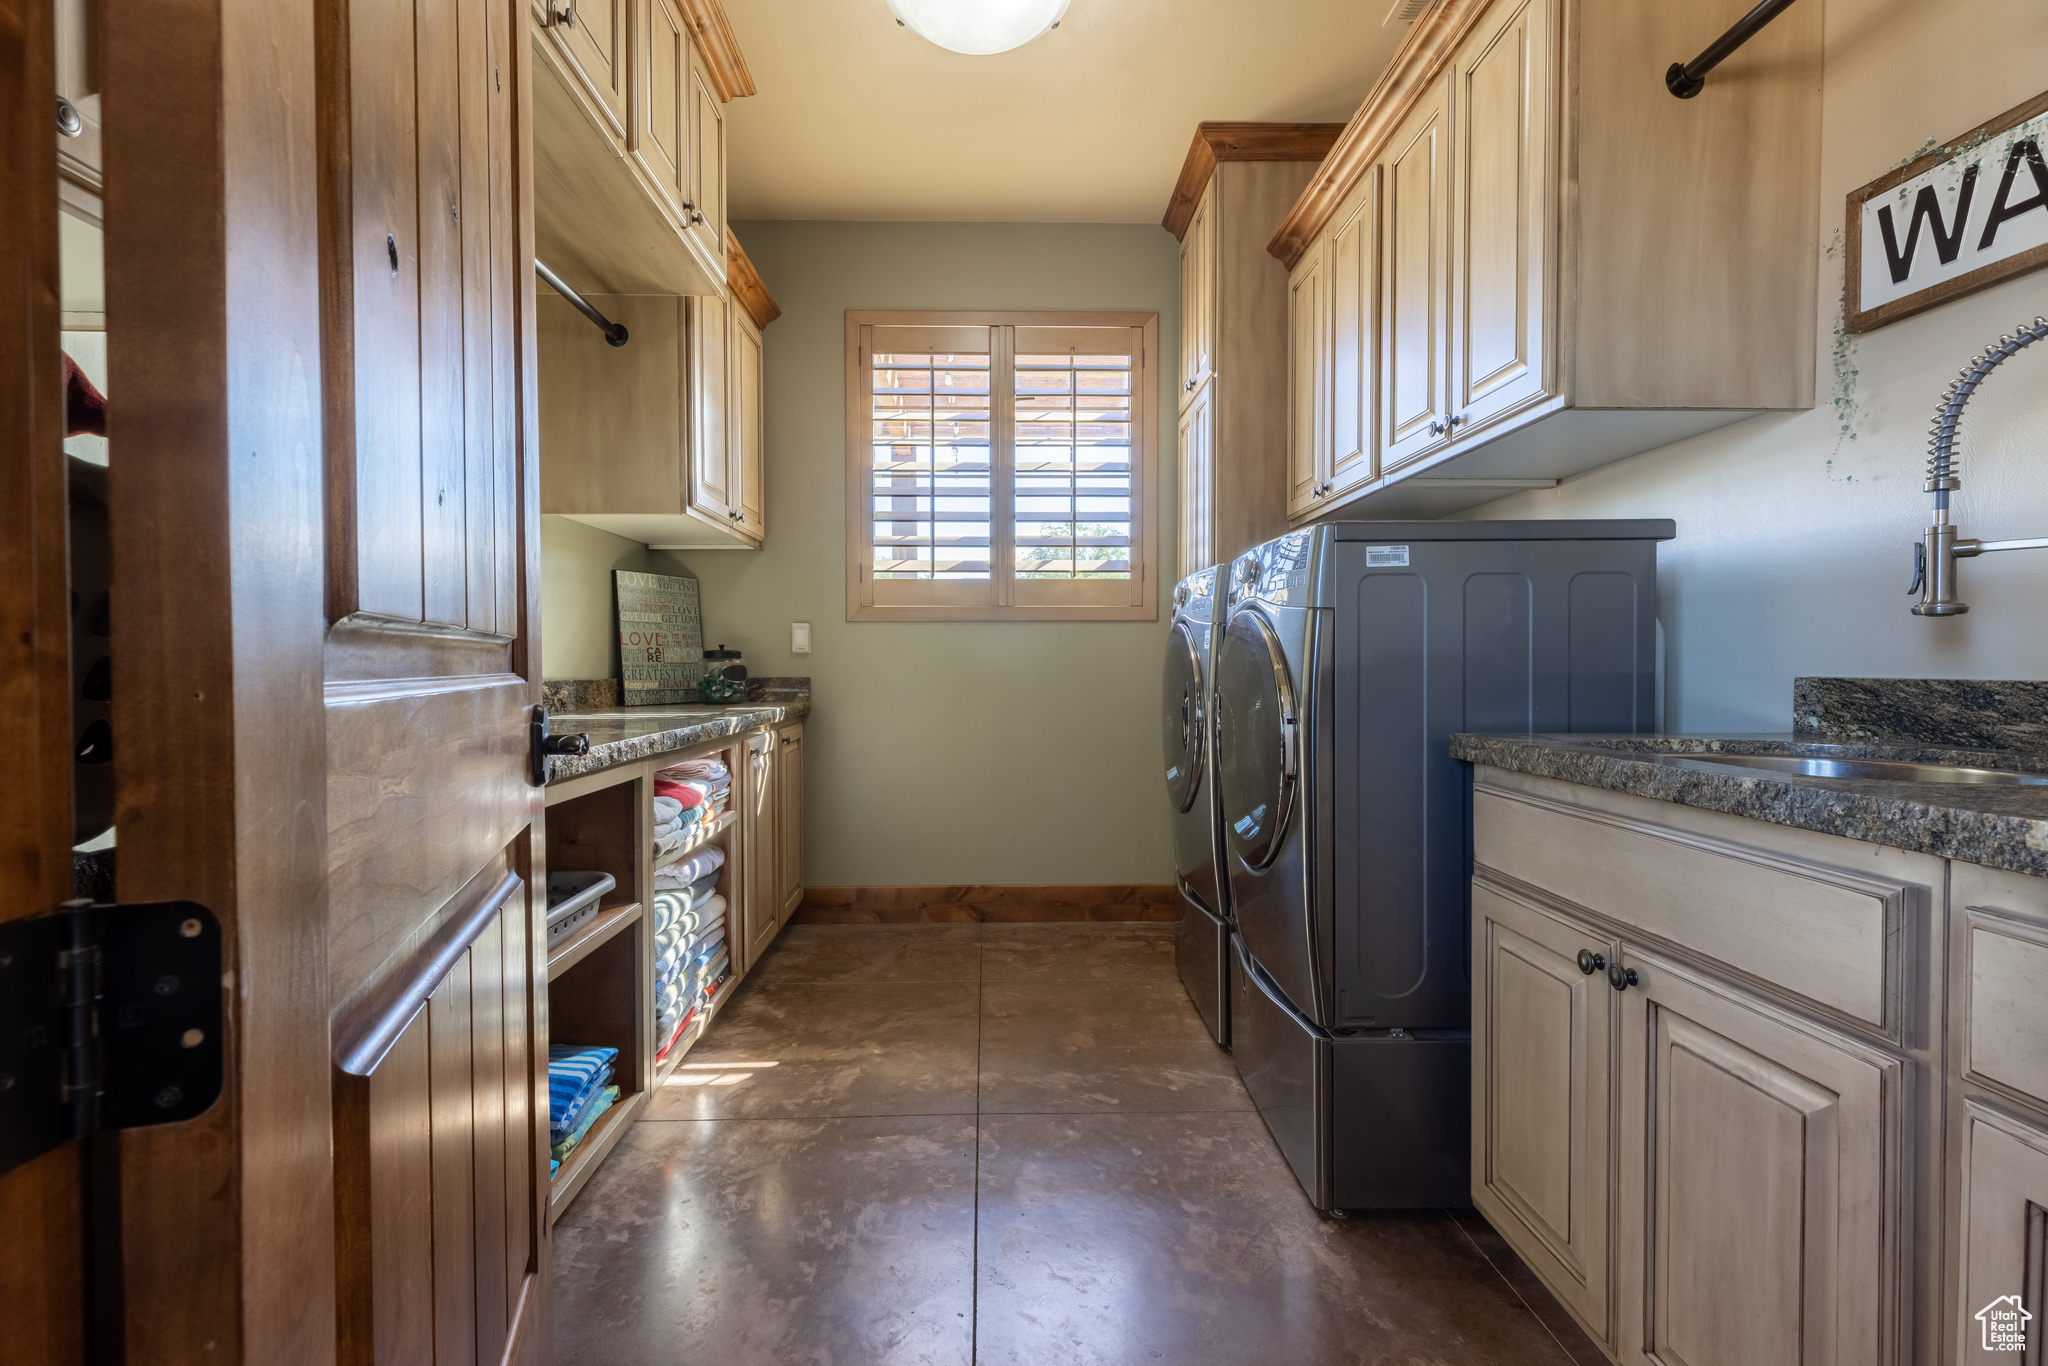 Laundry area with dark tile flooring, washing machine and clothes dryer, and cabinets